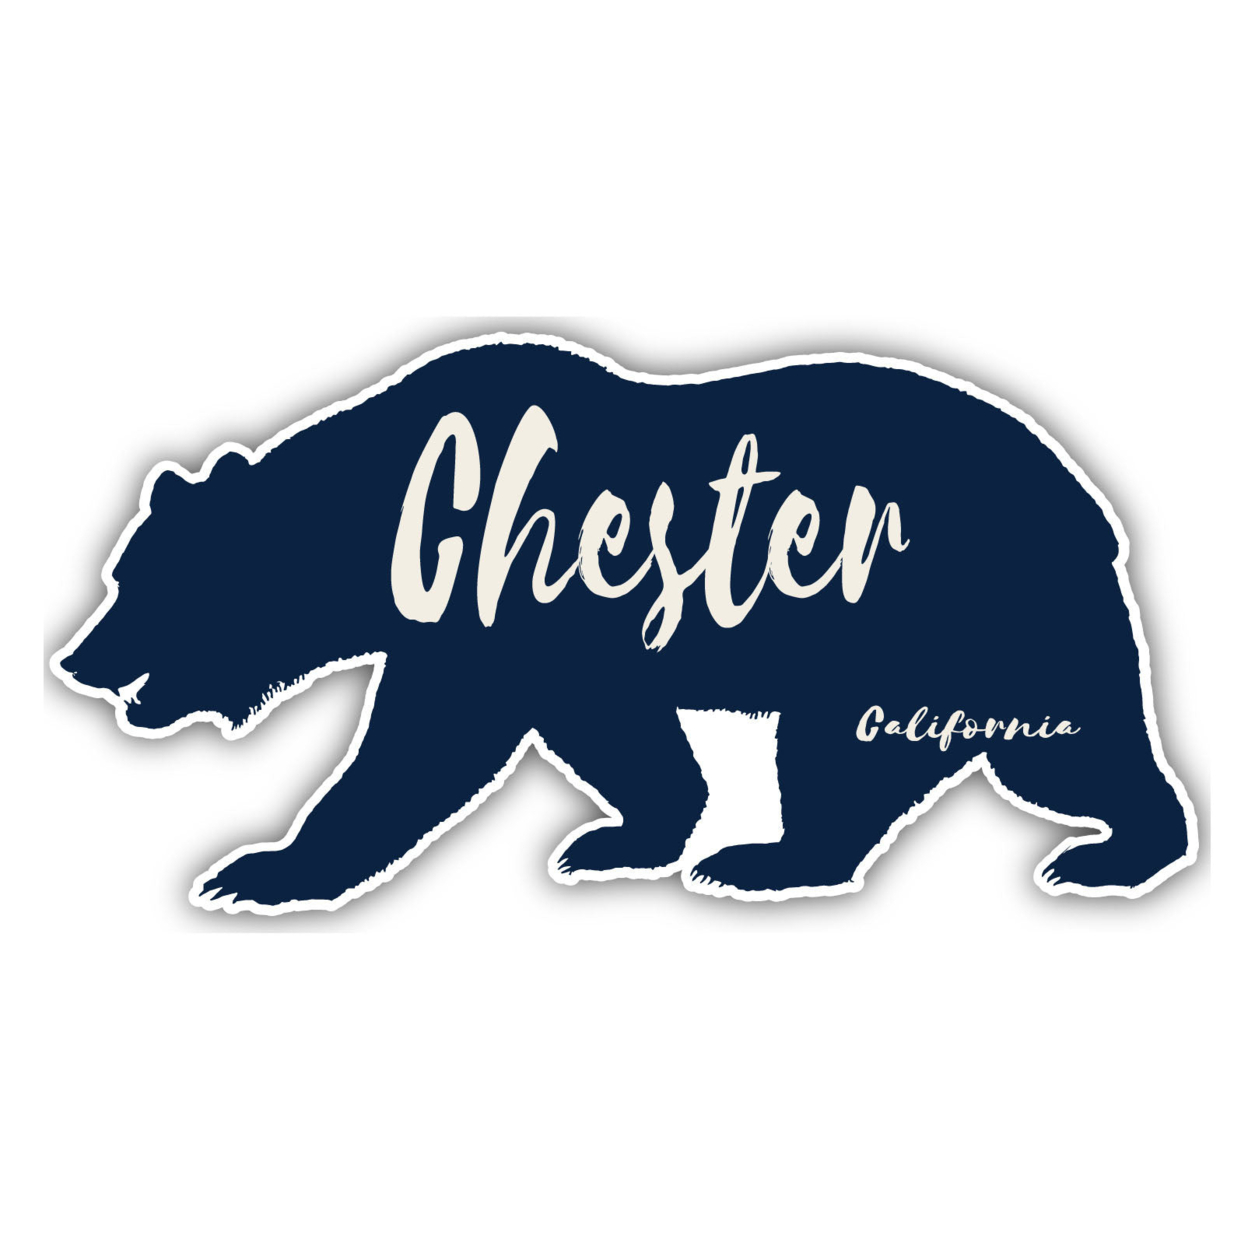 Chester California Souvenir Decorative Stickers (Choose Theme And Size) - 4-Pack, 6-Inch, Bear